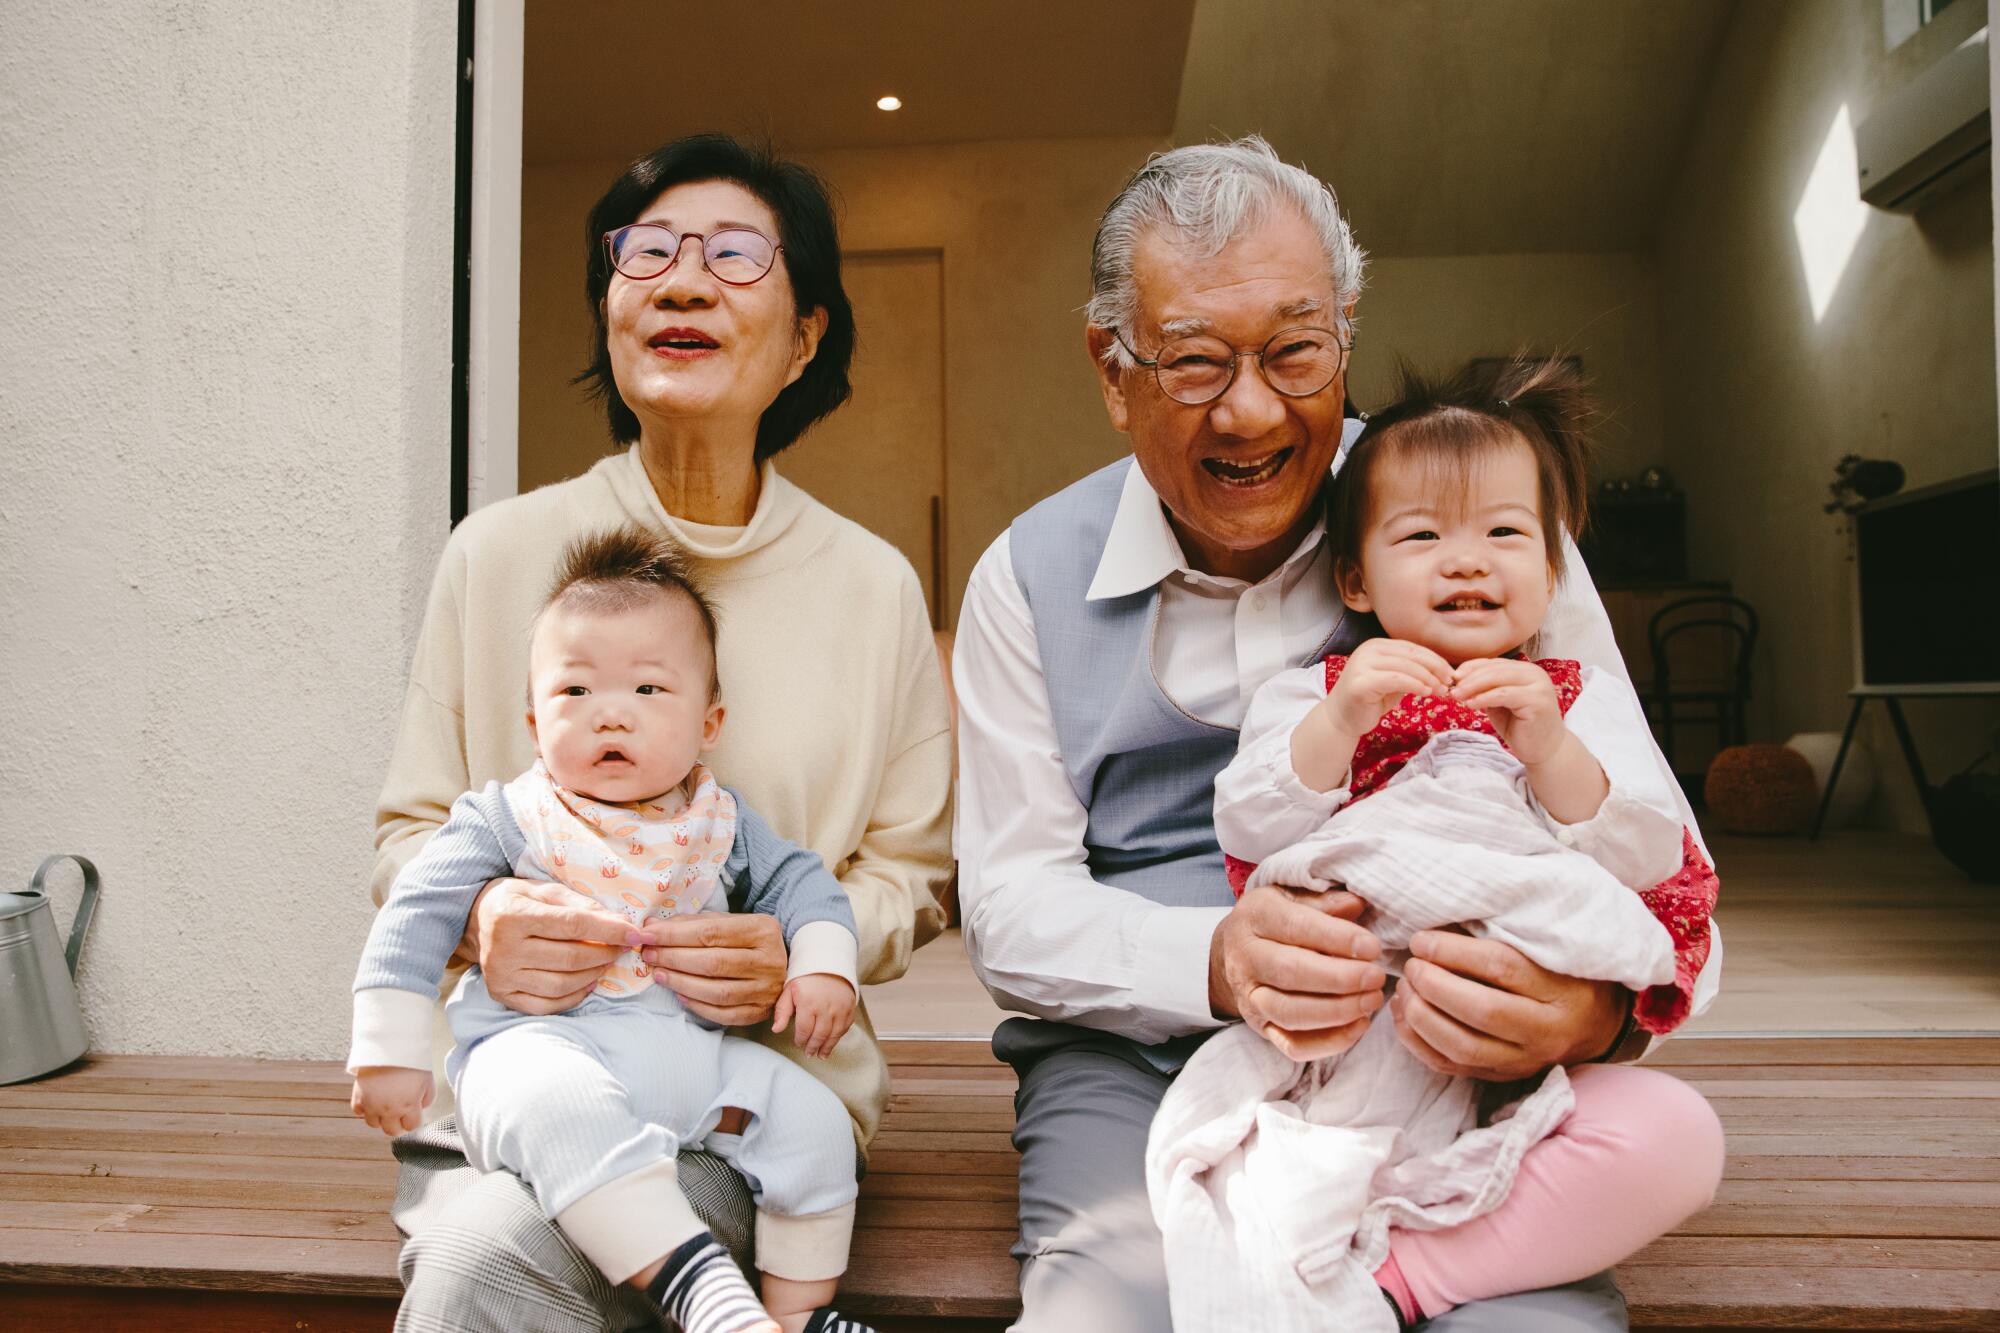 Grandparents are Wendy Lam and Alec Chan; children are Esme Chan and Dash Chan;